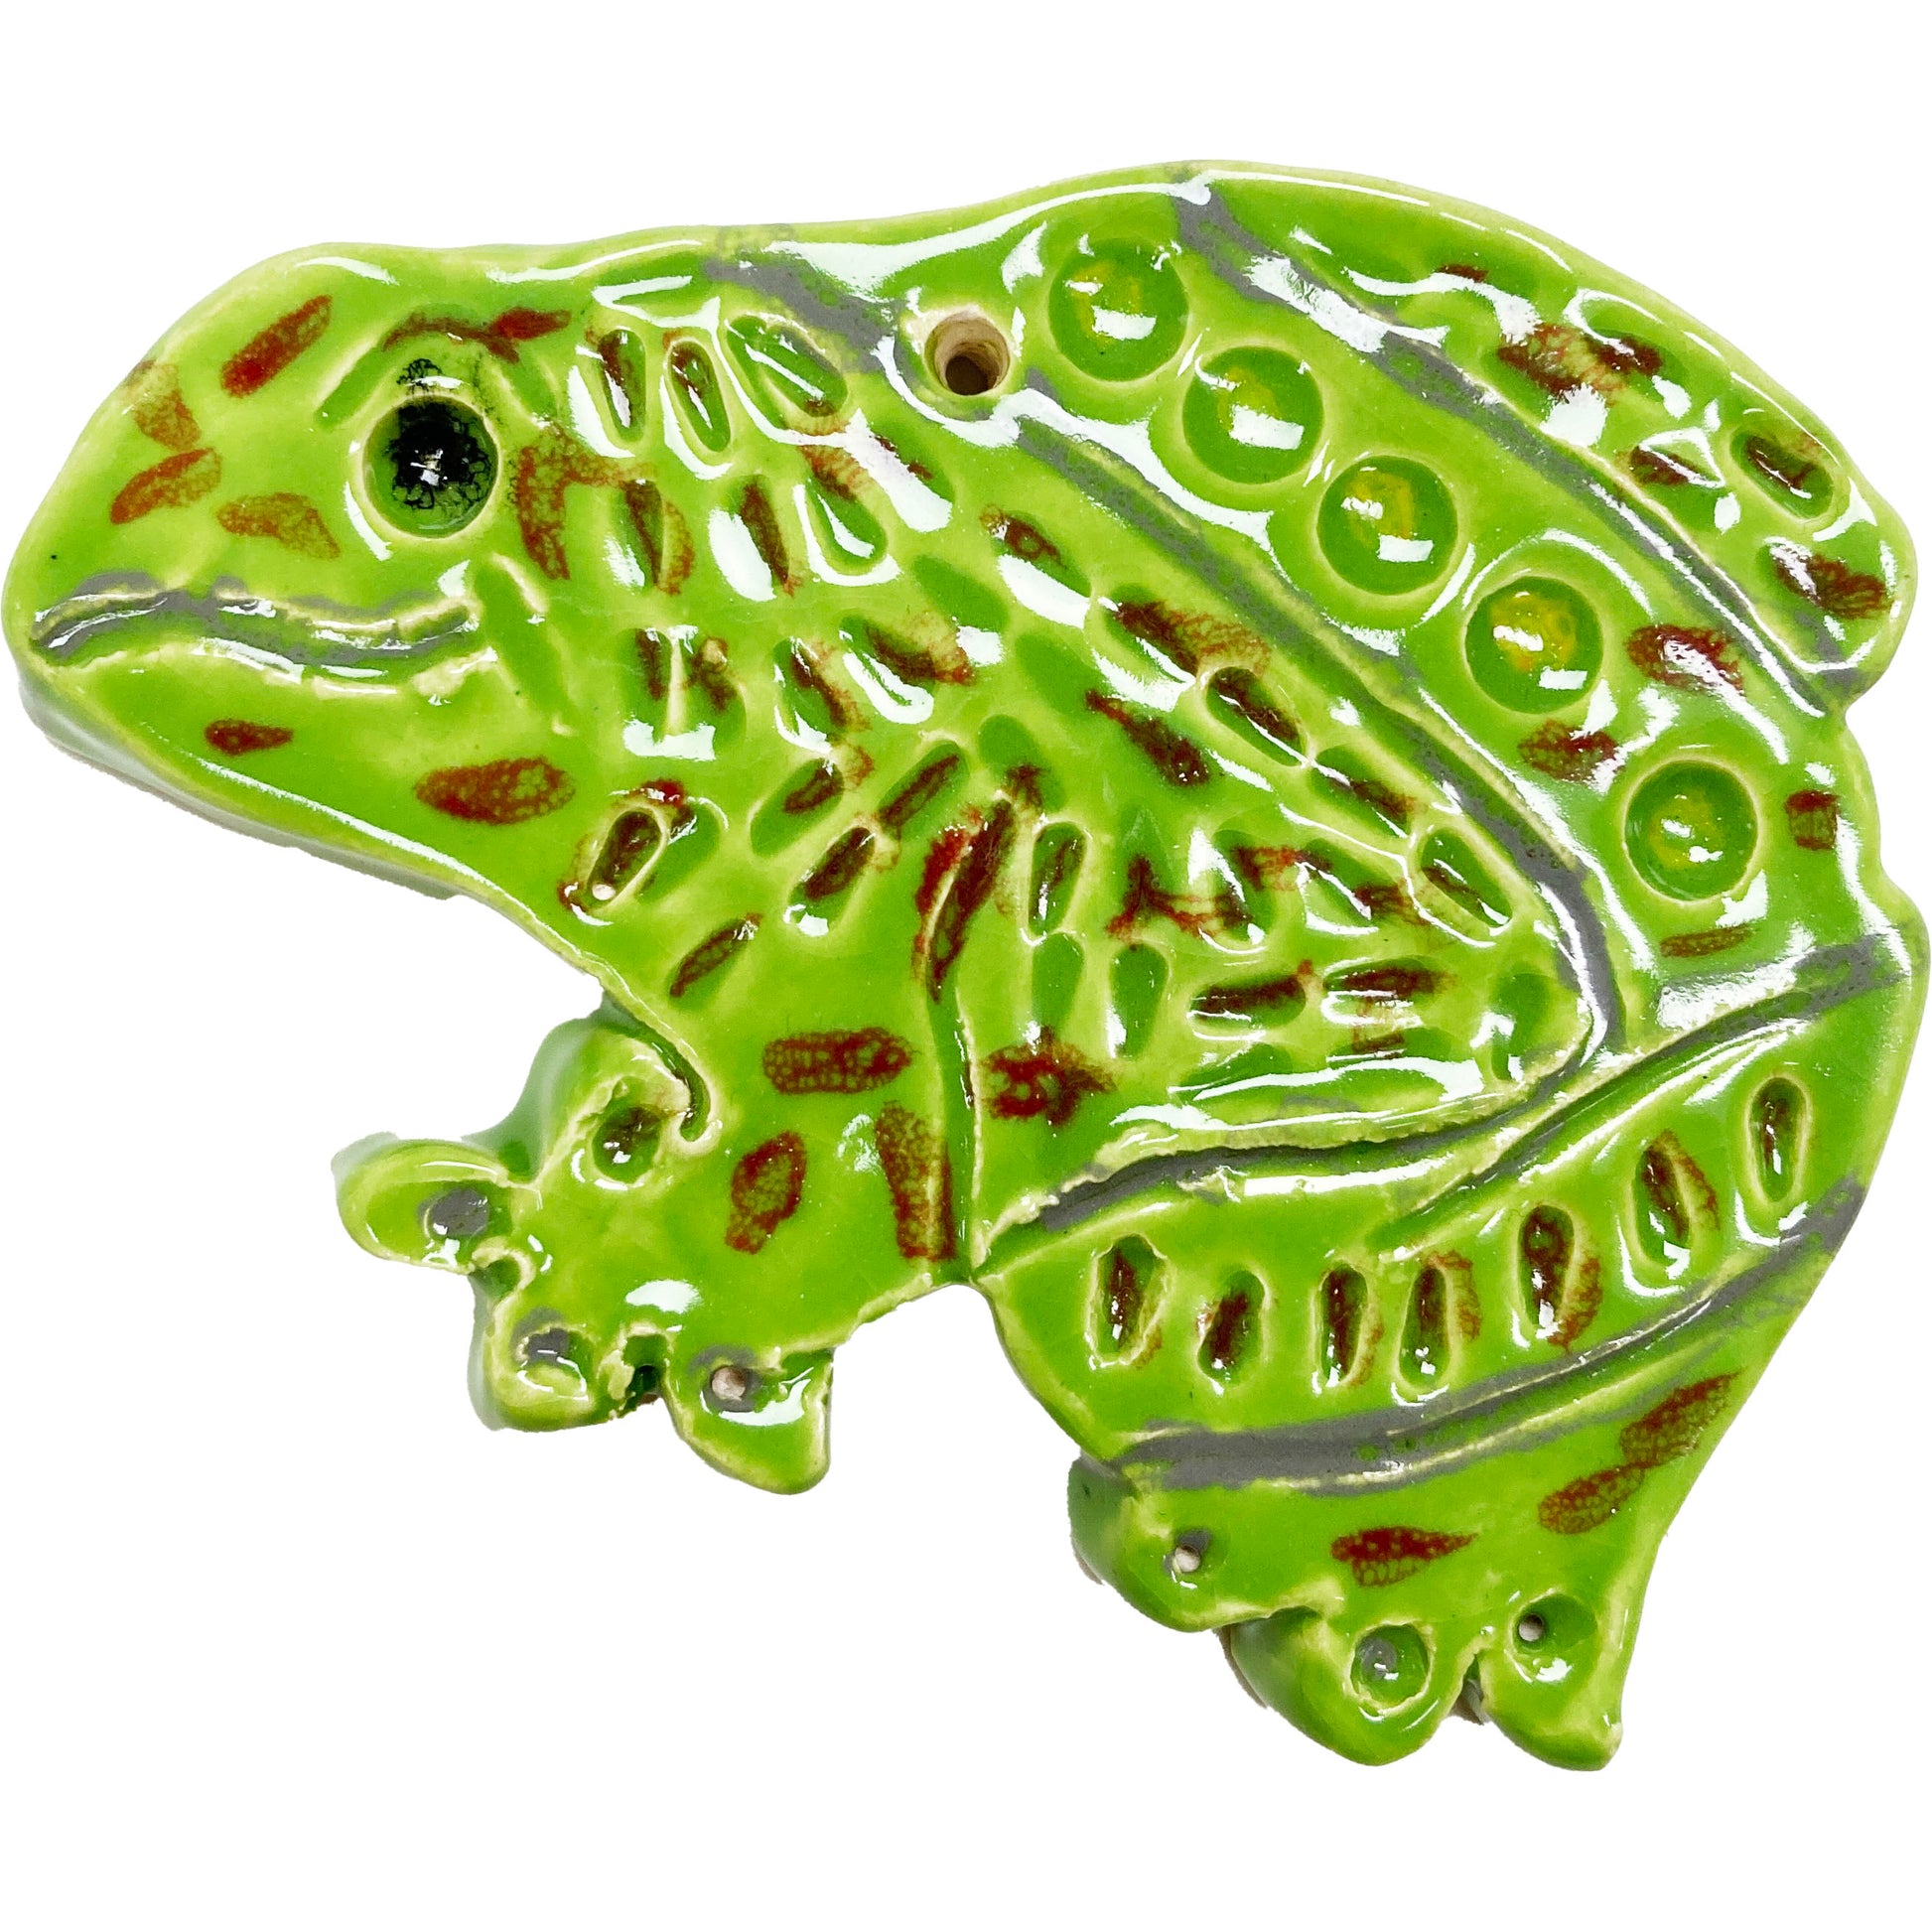 WATCH Resources Art Guild - Ceramic Arts Handmade Clay Crafts 4.5-inch x 3.5-inch Glazed Frog made by Emily Knoles